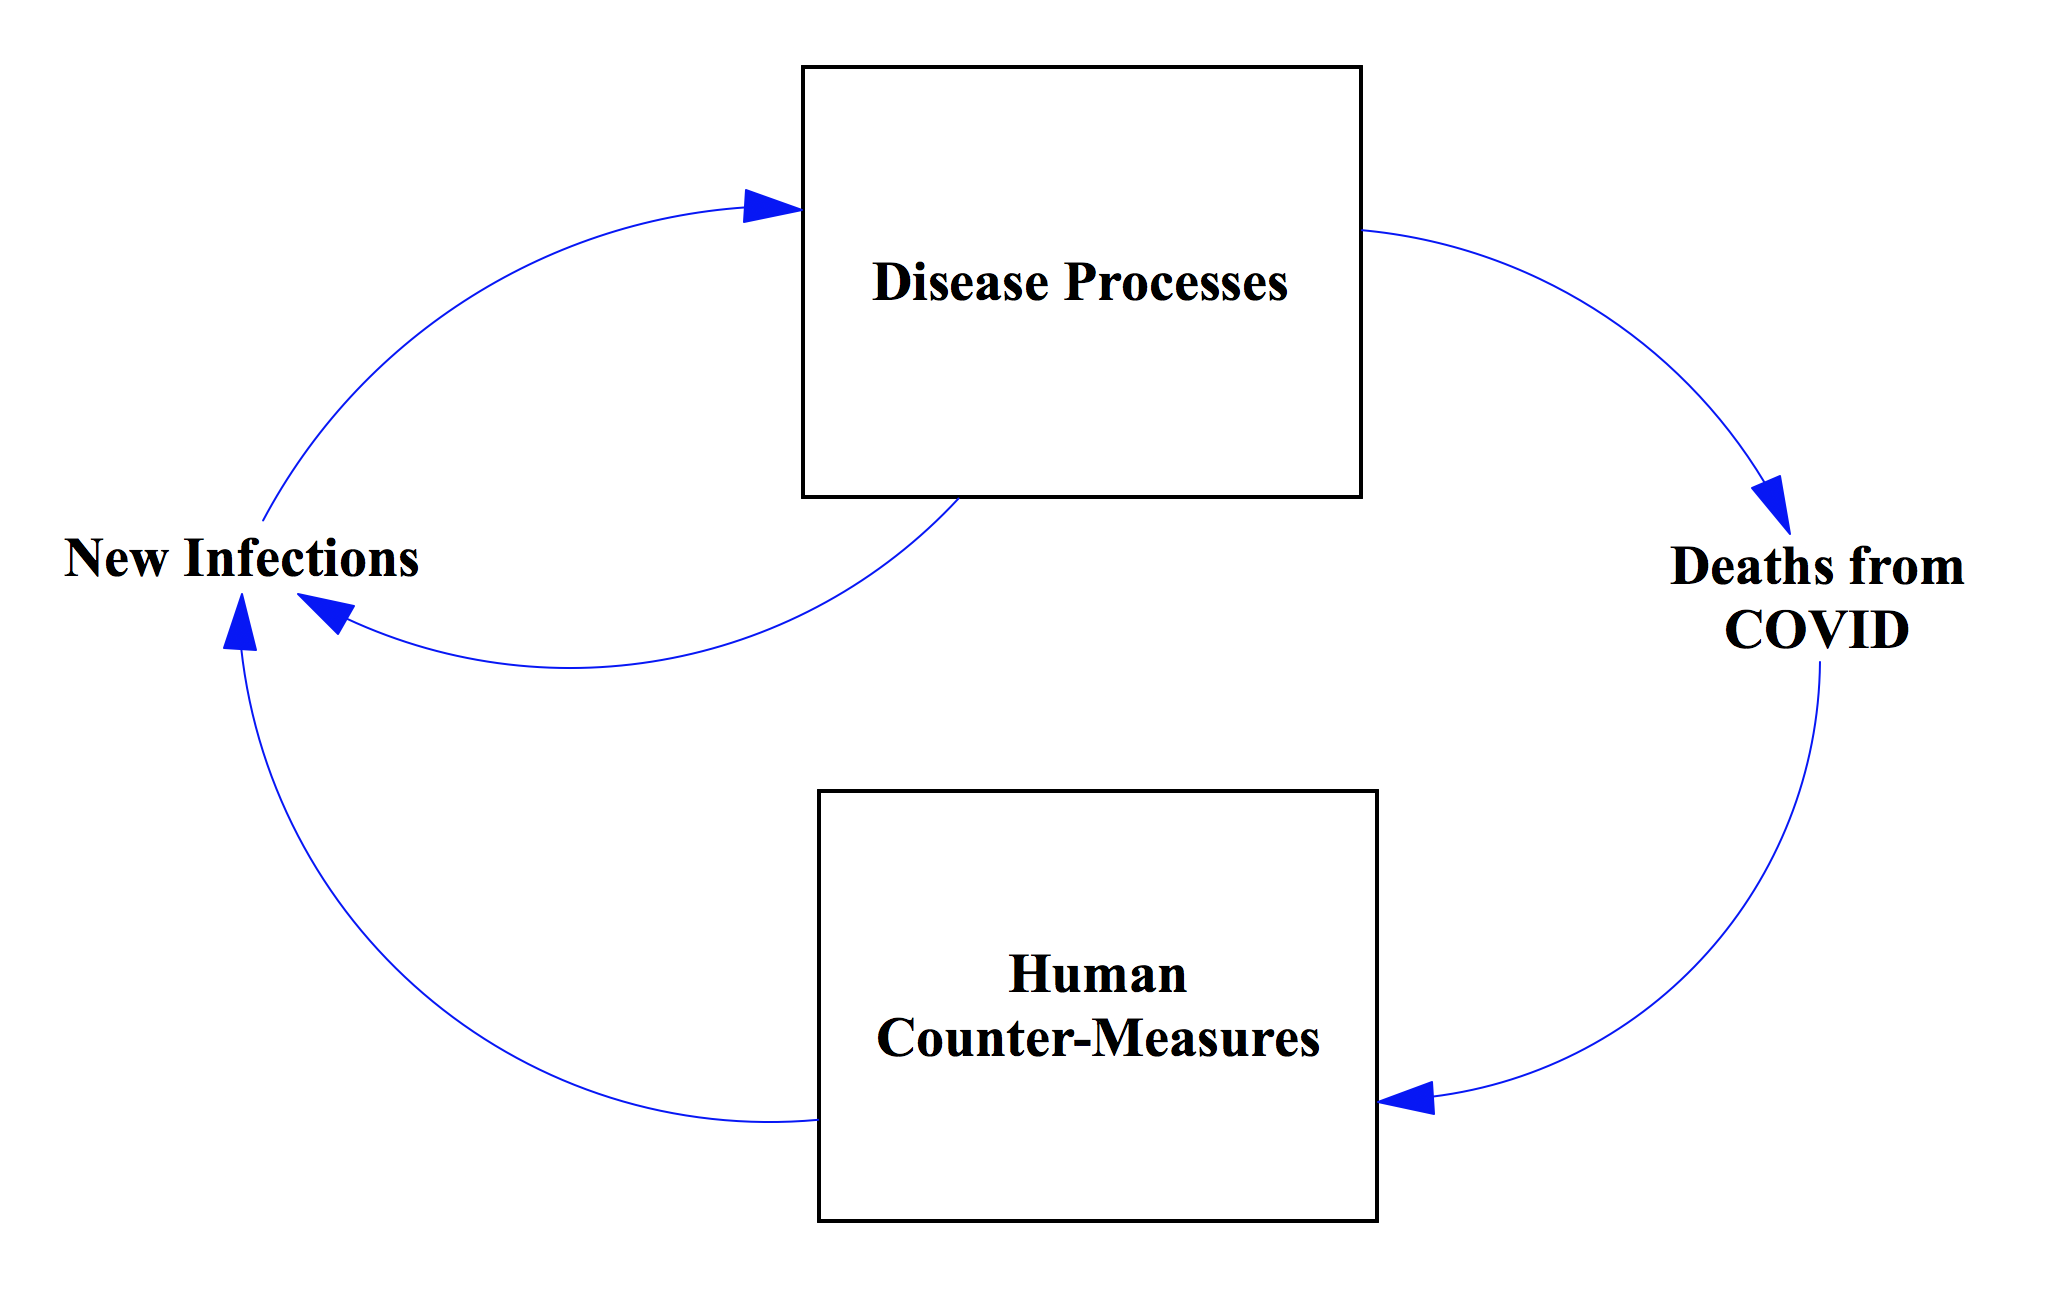 Figure 2: Feedback Process that drives recurring surges of COVID pandemic: Disease outcomes drive human countermeasures that over time shift the disease processes